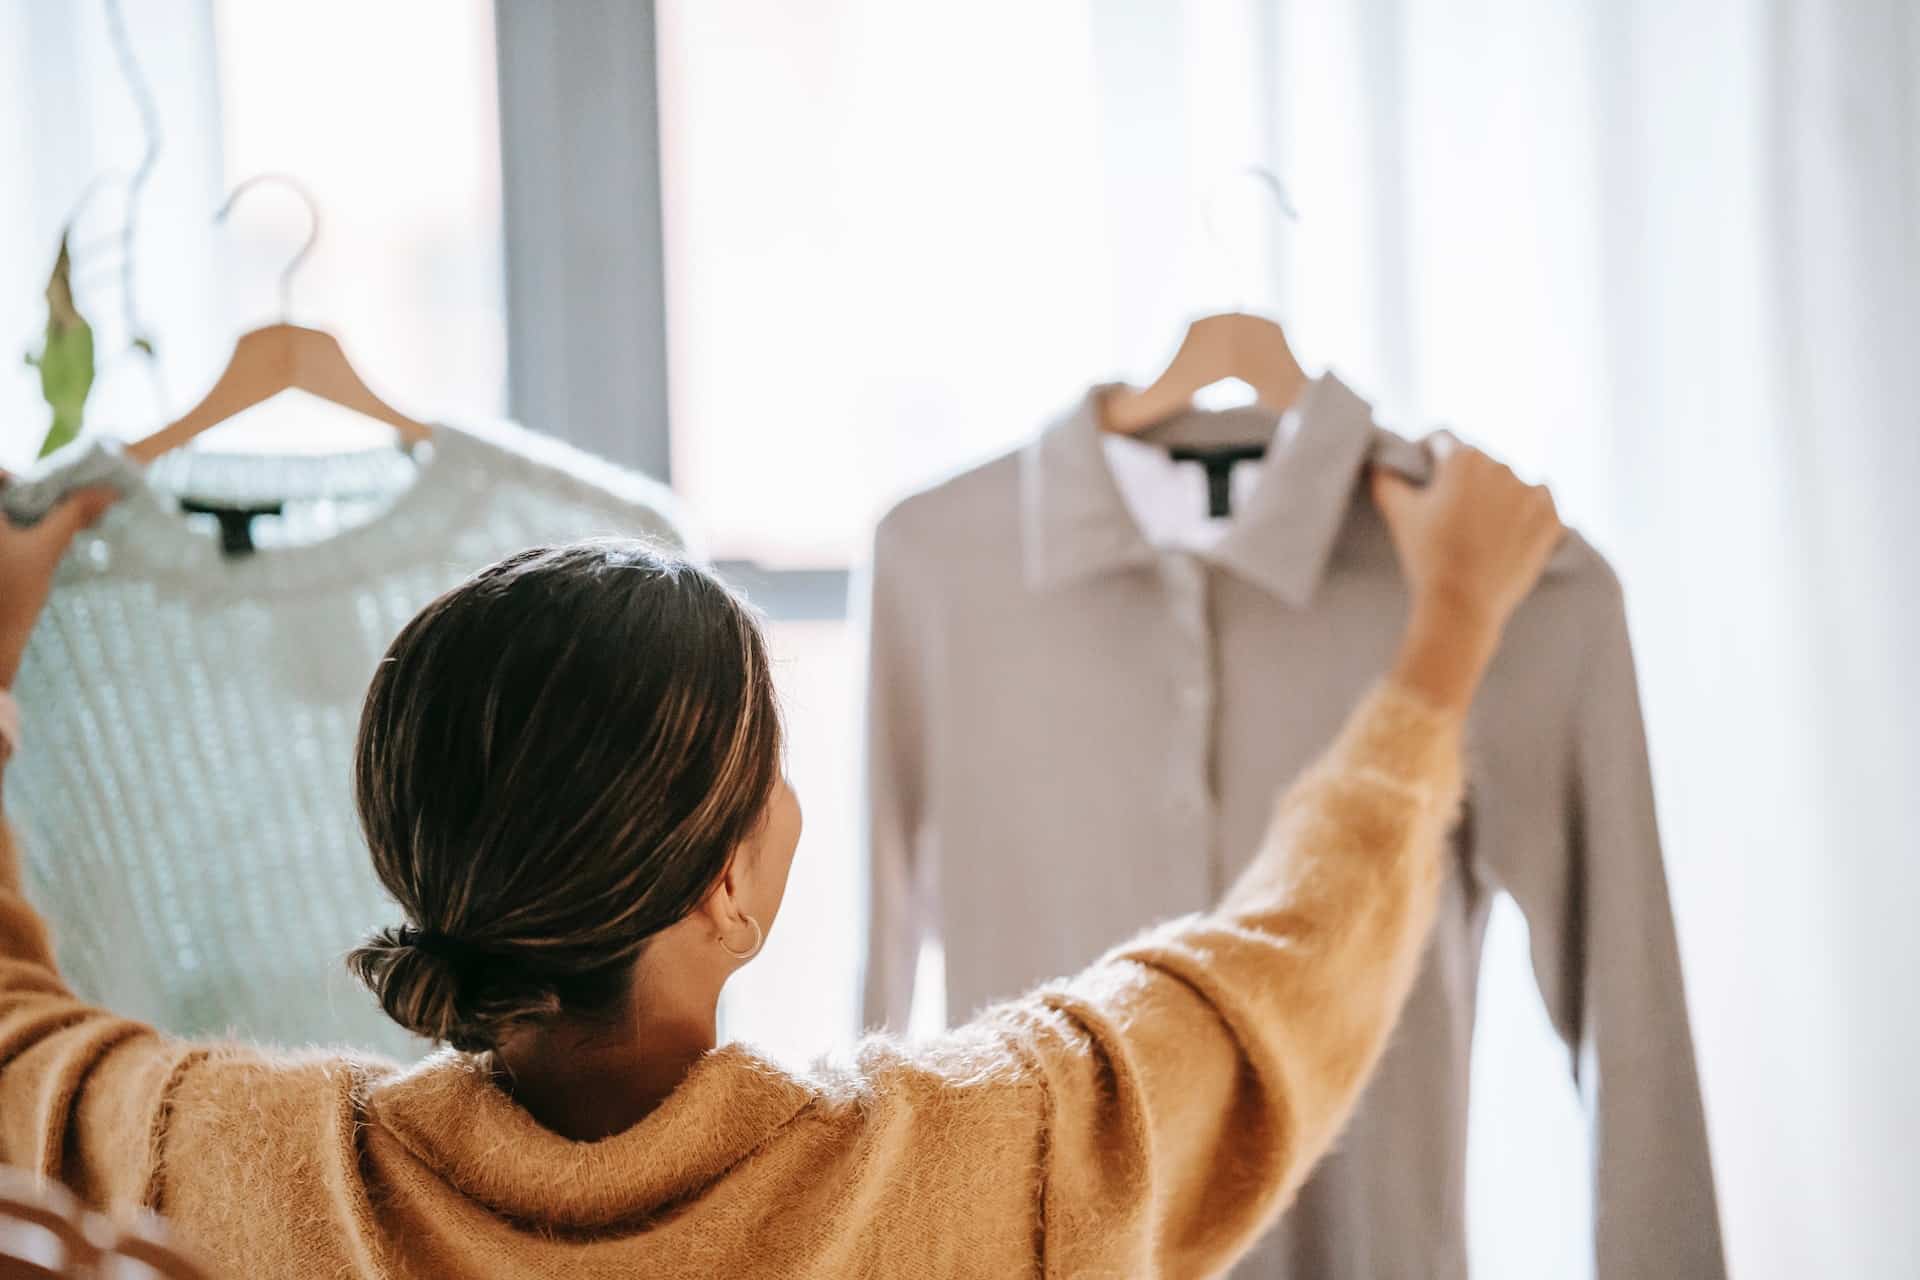 A woman looking at clothes on a hanger.